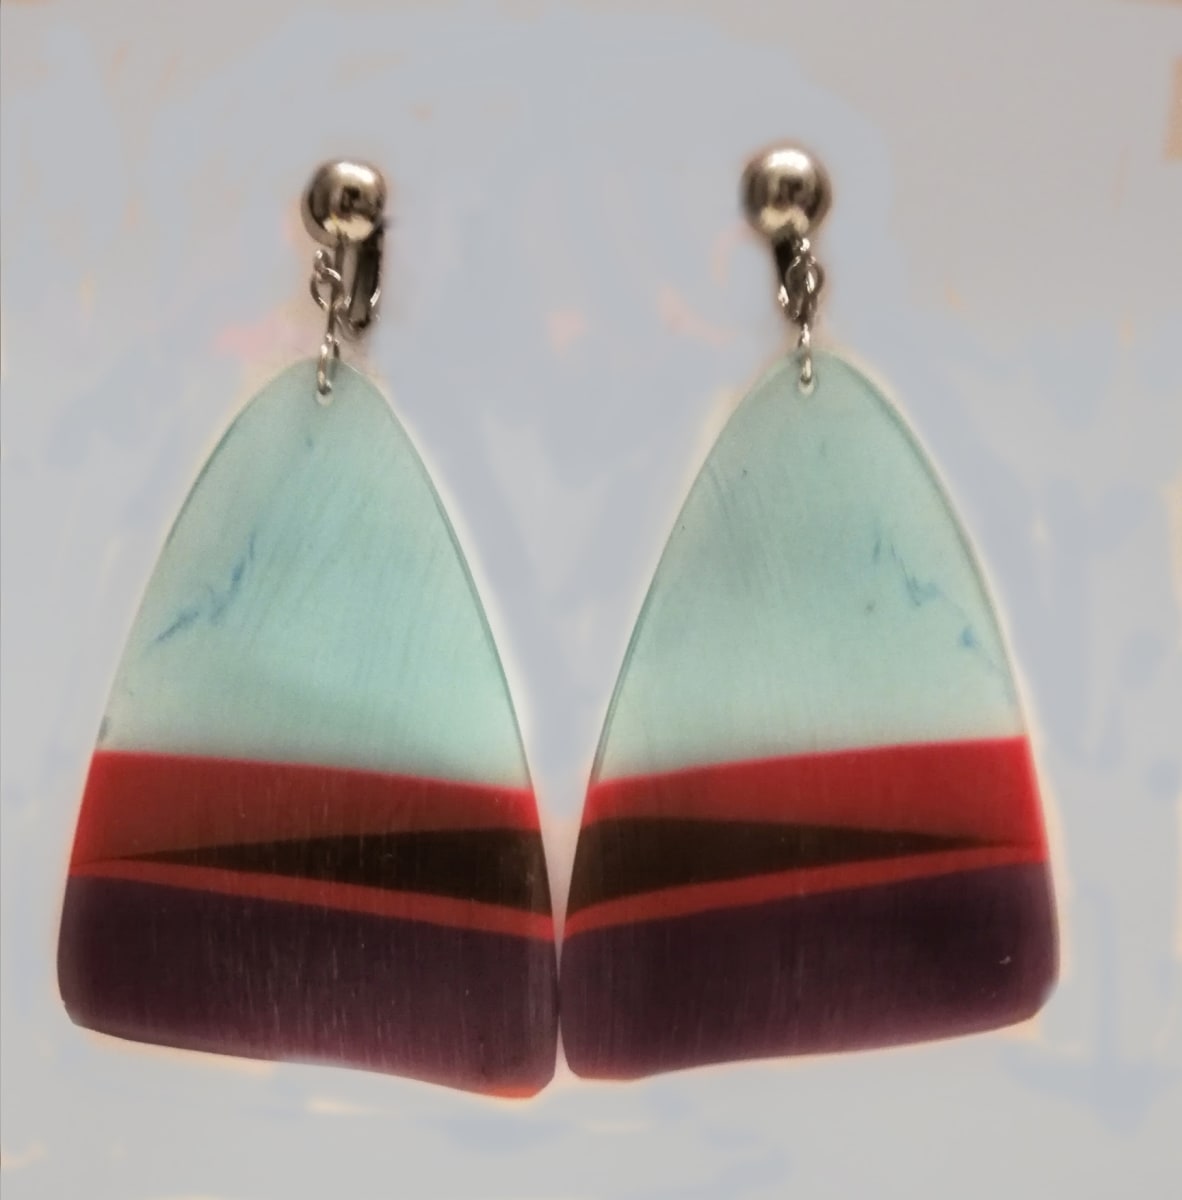 Turquoise, red, brown 'slice' earrings with stainless steel clips  Image: Turquoise, red, brown 'slice' earrings with stainless steel clips